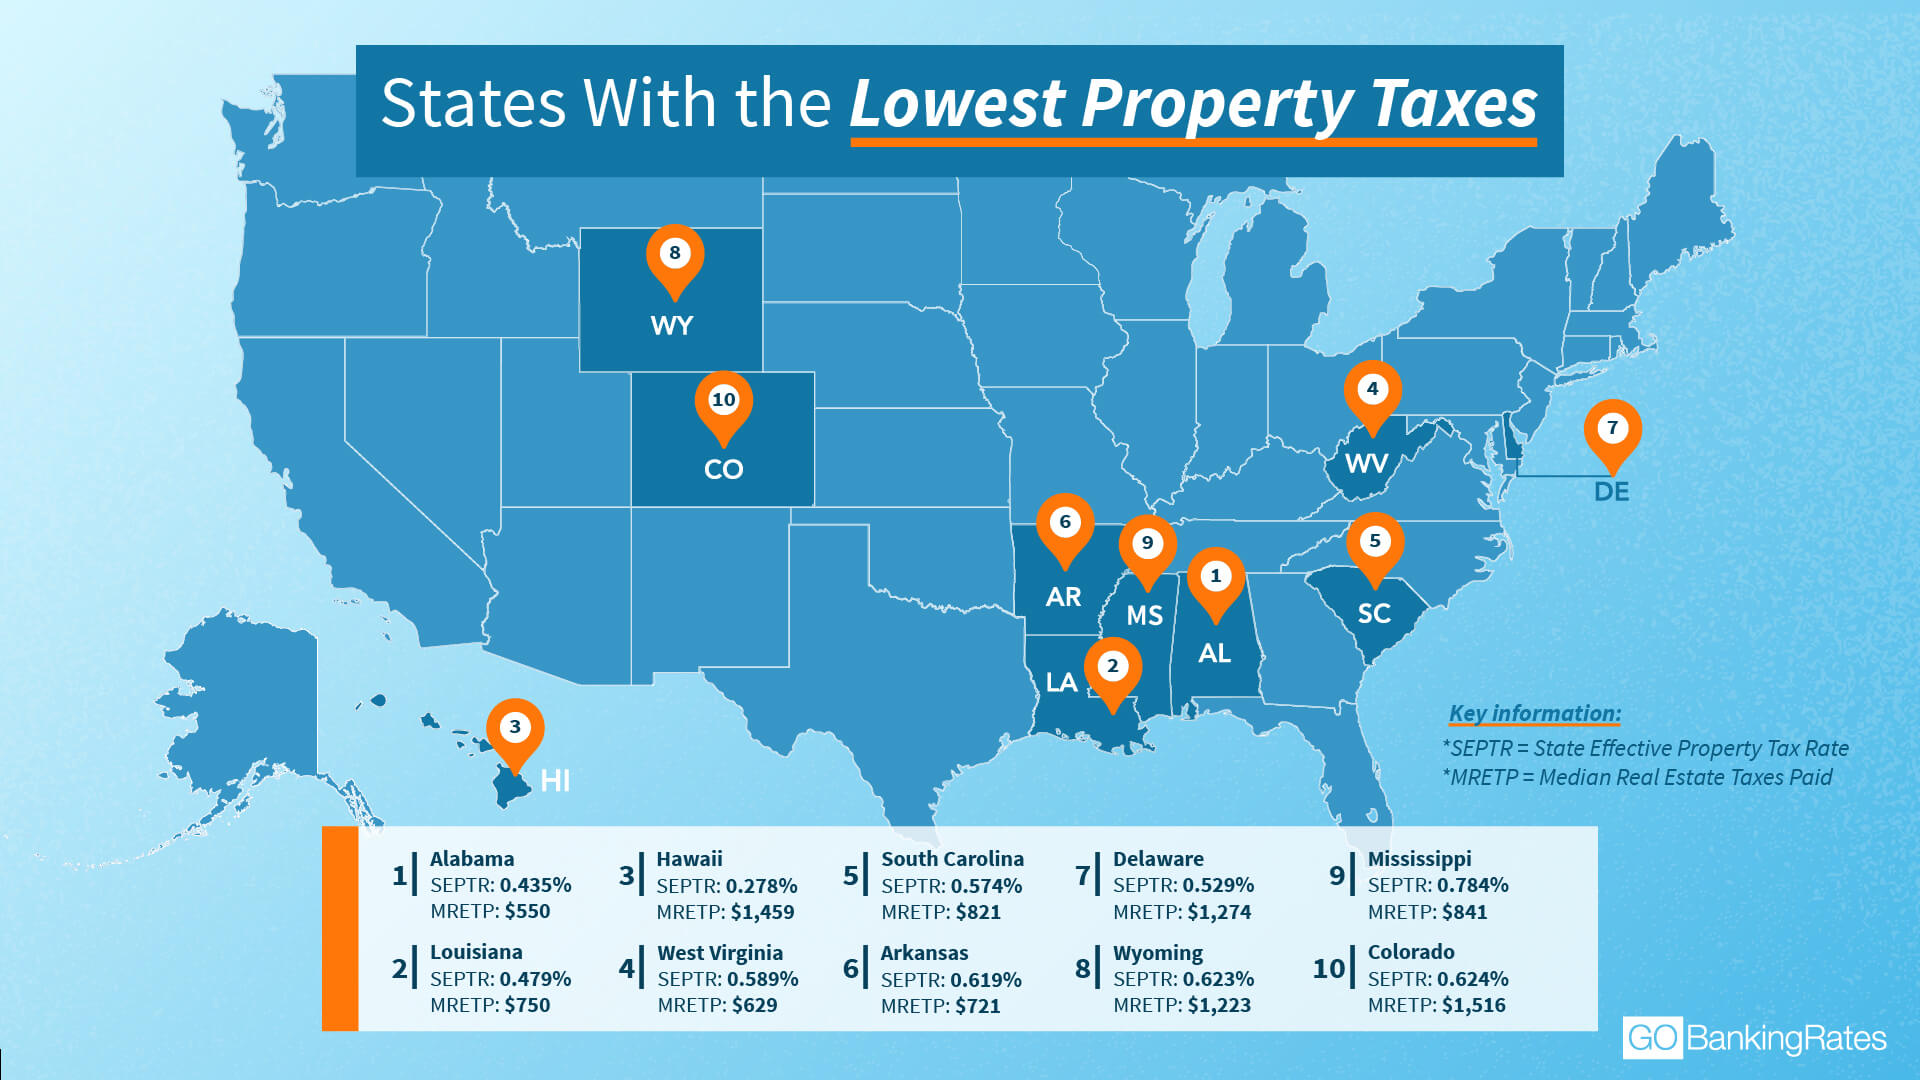 Thinking About Moving? These States Have the Lowest Property Taxes